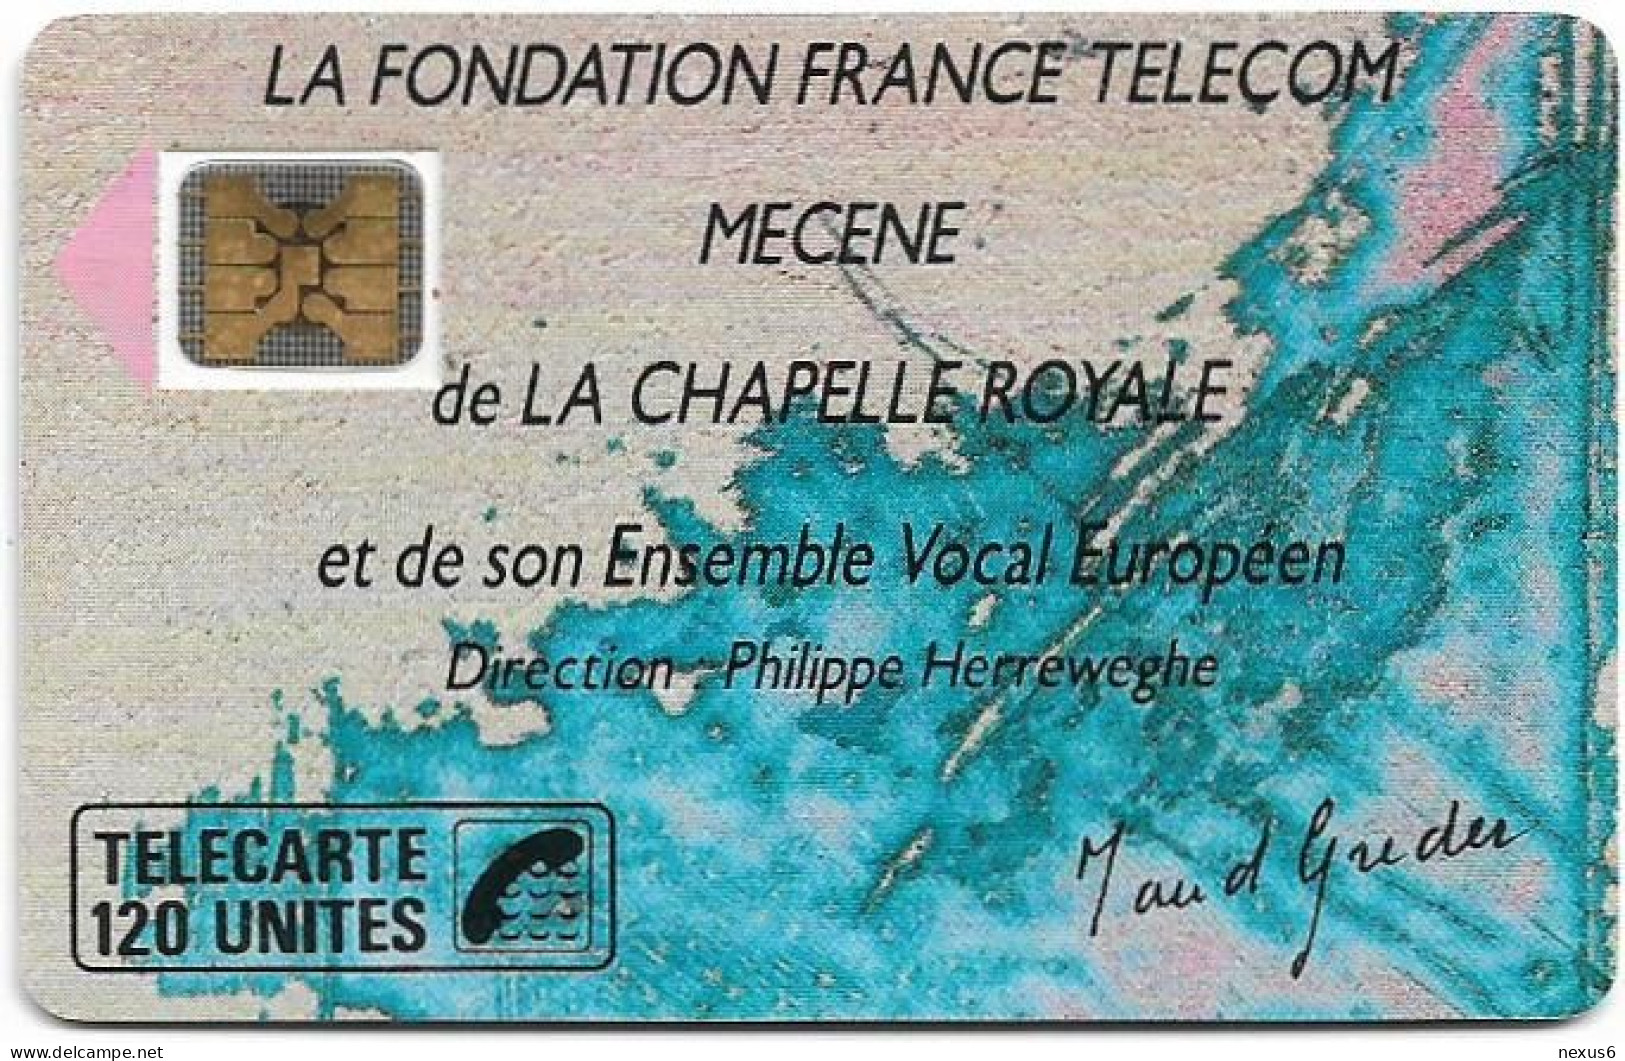 France - 0078 - Chapelle Royale 3 (texte Fin), SC4 GB, Cn. 106329, 06.1989, 120Units, 300.000ex, Used - 1989